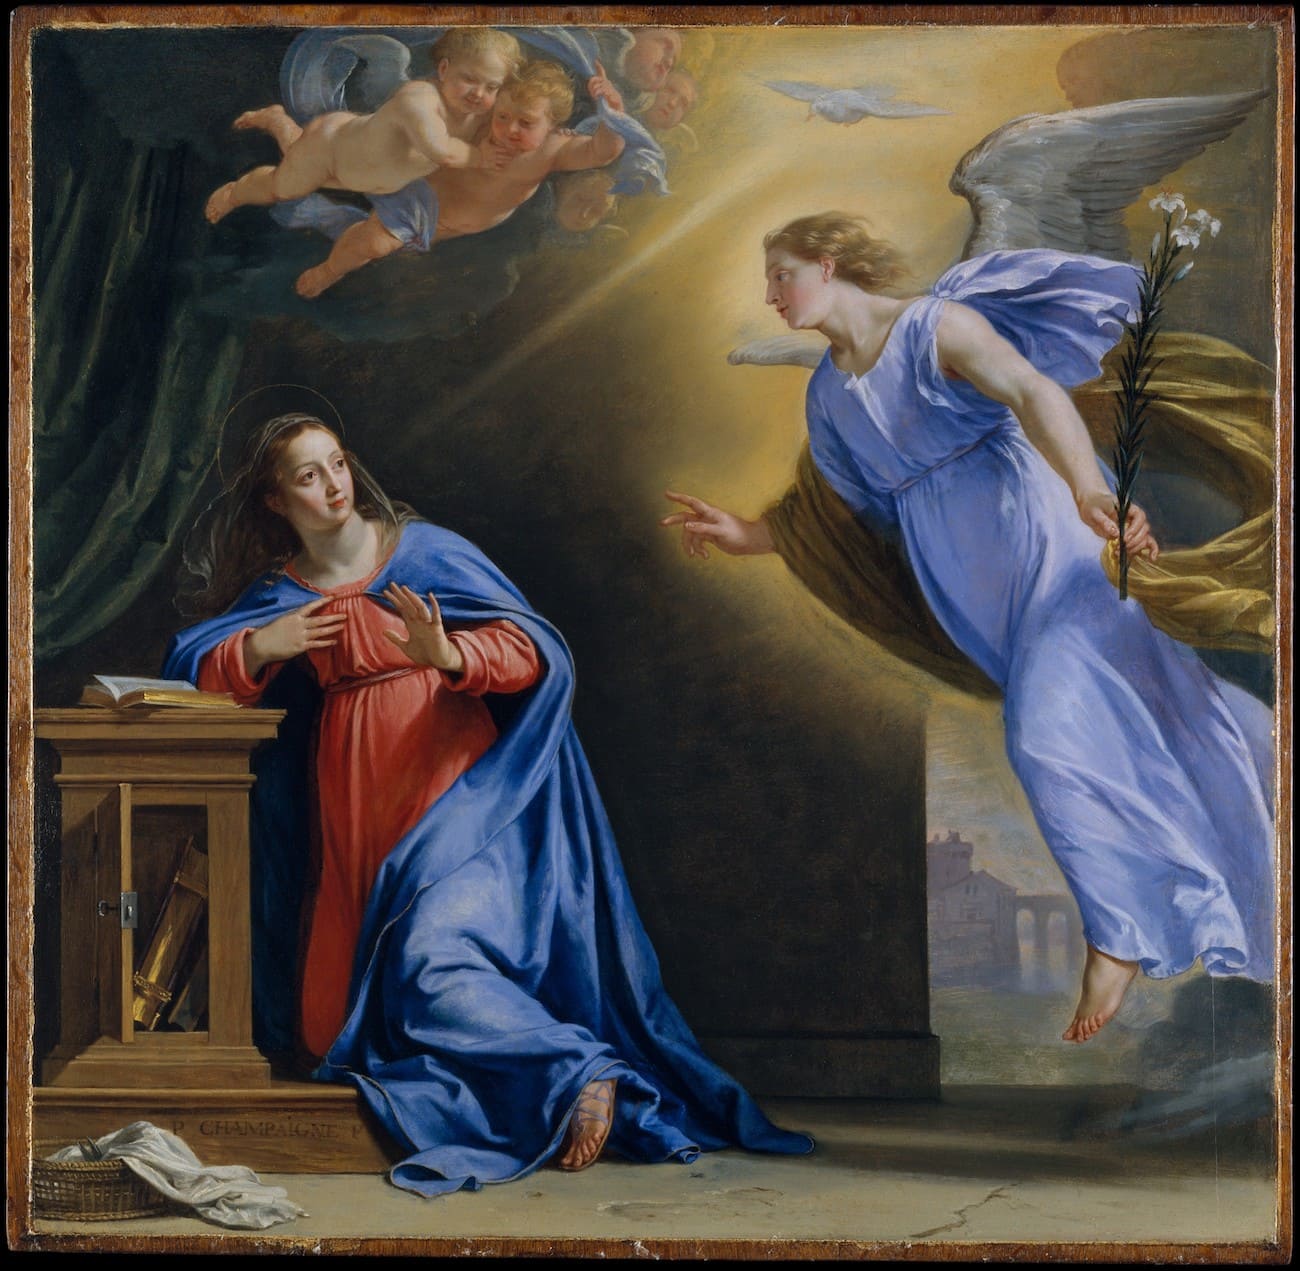 The Annunciation, Philippe de Champaigne, 1644, The Metropolitan Museum of Art (article on perfectionism)